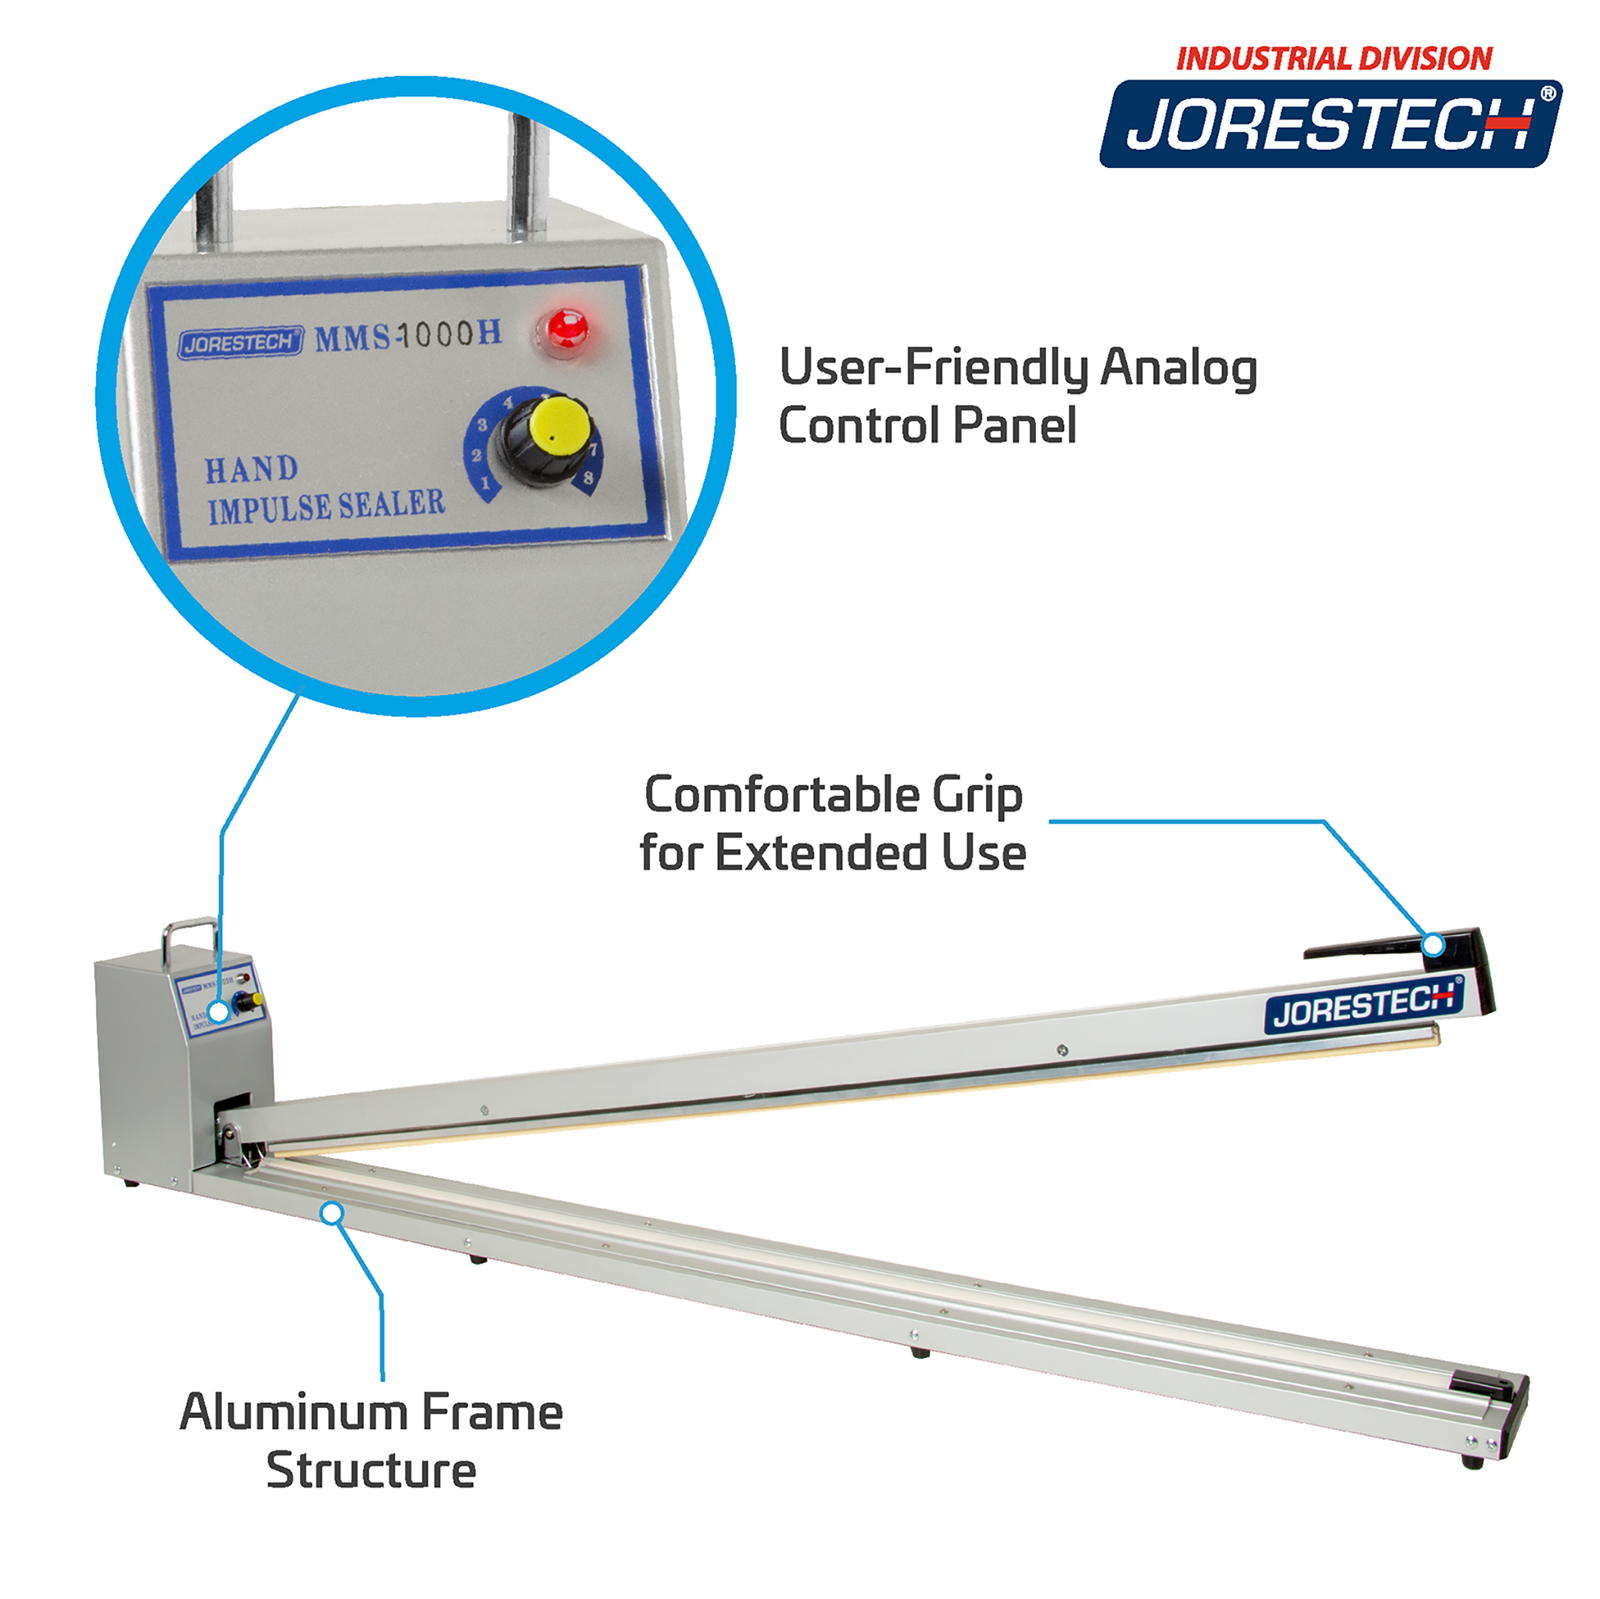 40 inch manual bag impulse heat sealer. Features include, aluminum frame structure, user friendly analog control panel, and comfortable grip for extended use. Close-ups of the control panel